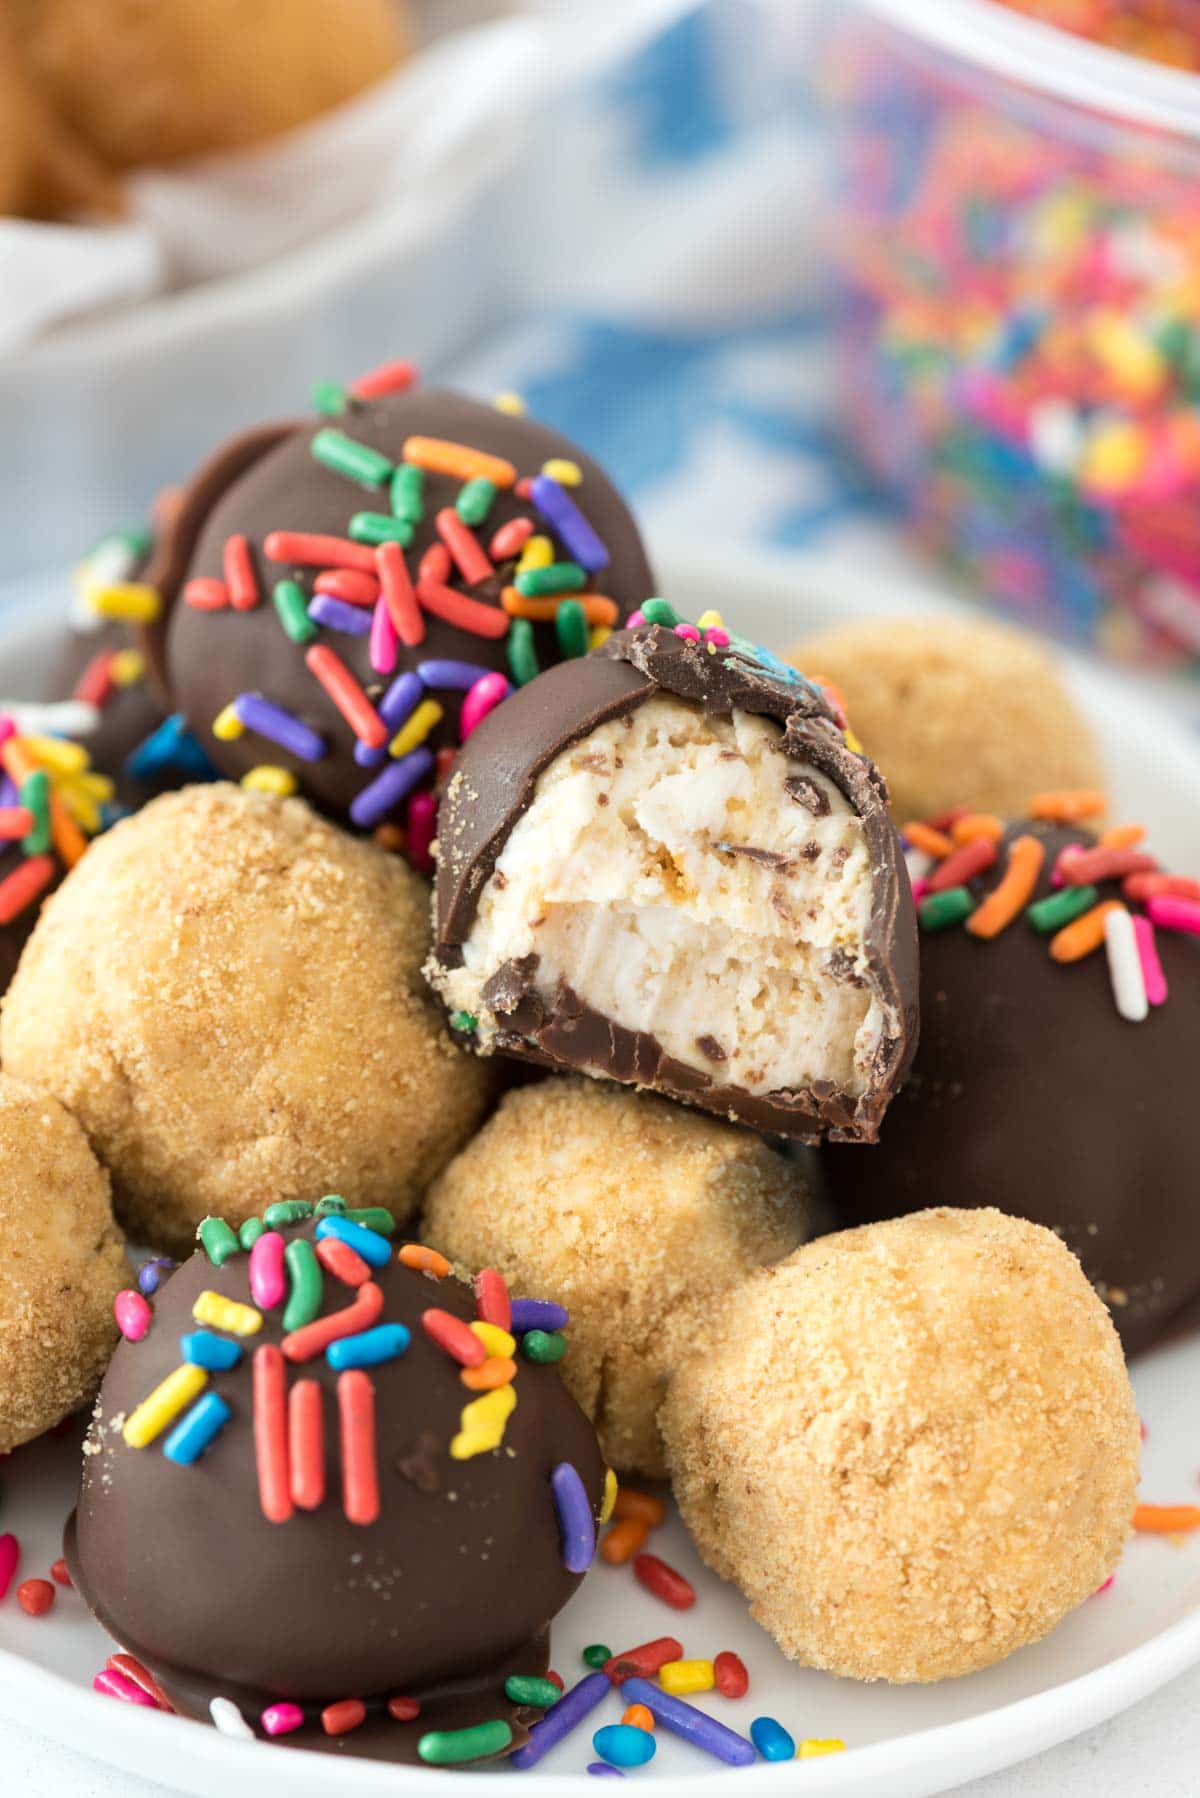 No Bake Cheesecake Truffles - this easy truffle recipe are actually bites of no bake cheesecake! Make them coated in graham crumbs or chocolate, or deep fry them like at the fair!